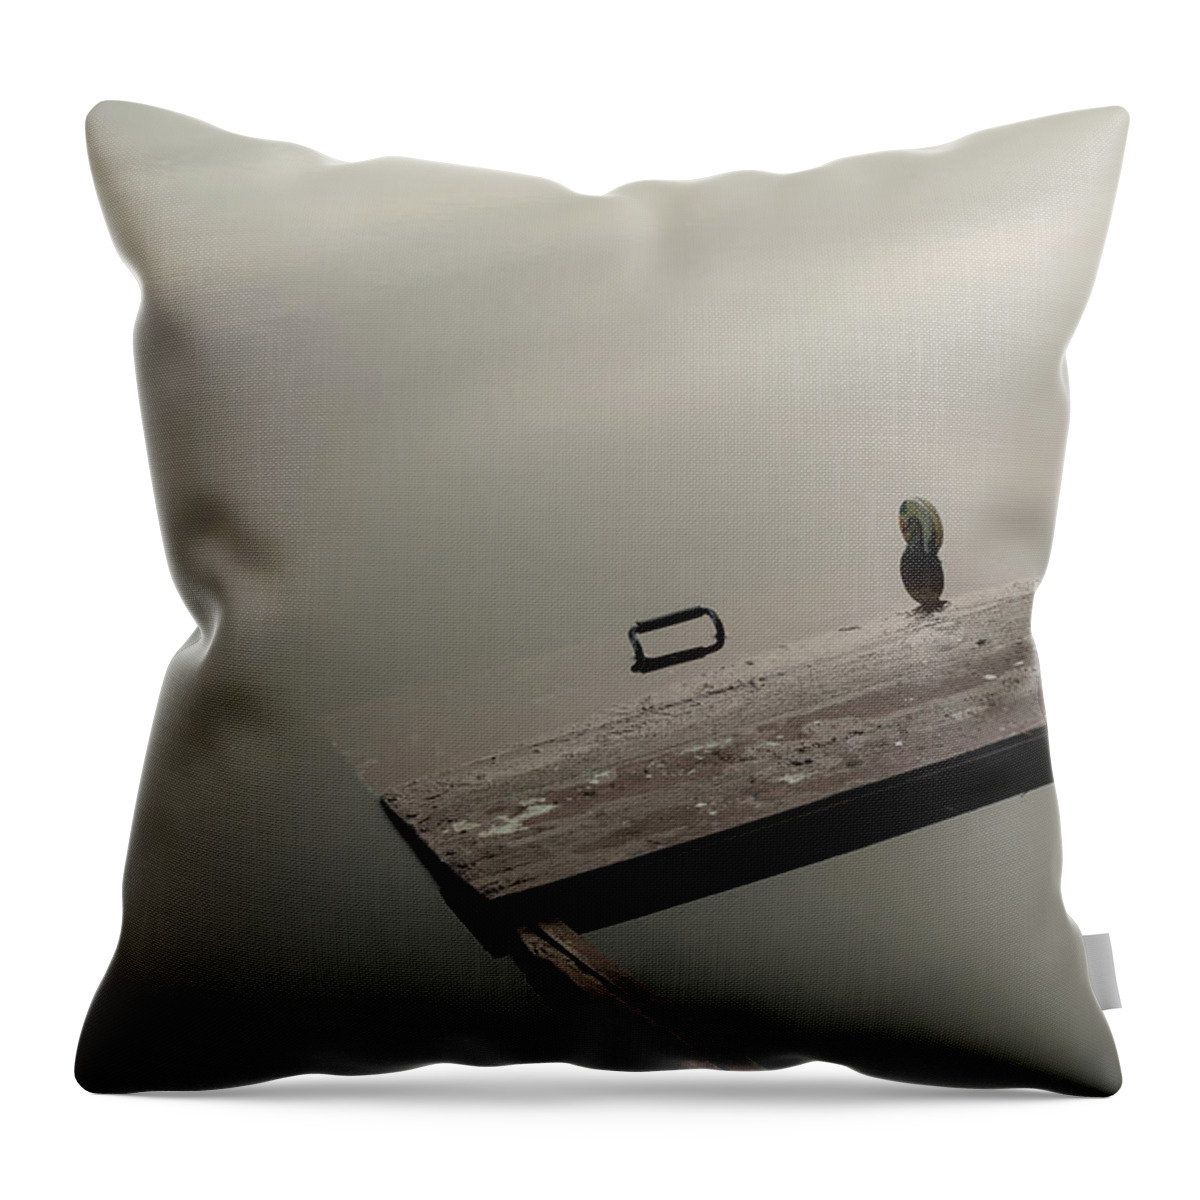 Wherry Throw Pillow featuring the photograph Sunken Punt on Minimalist Photograph by Martin Vorel Minimalist Photography